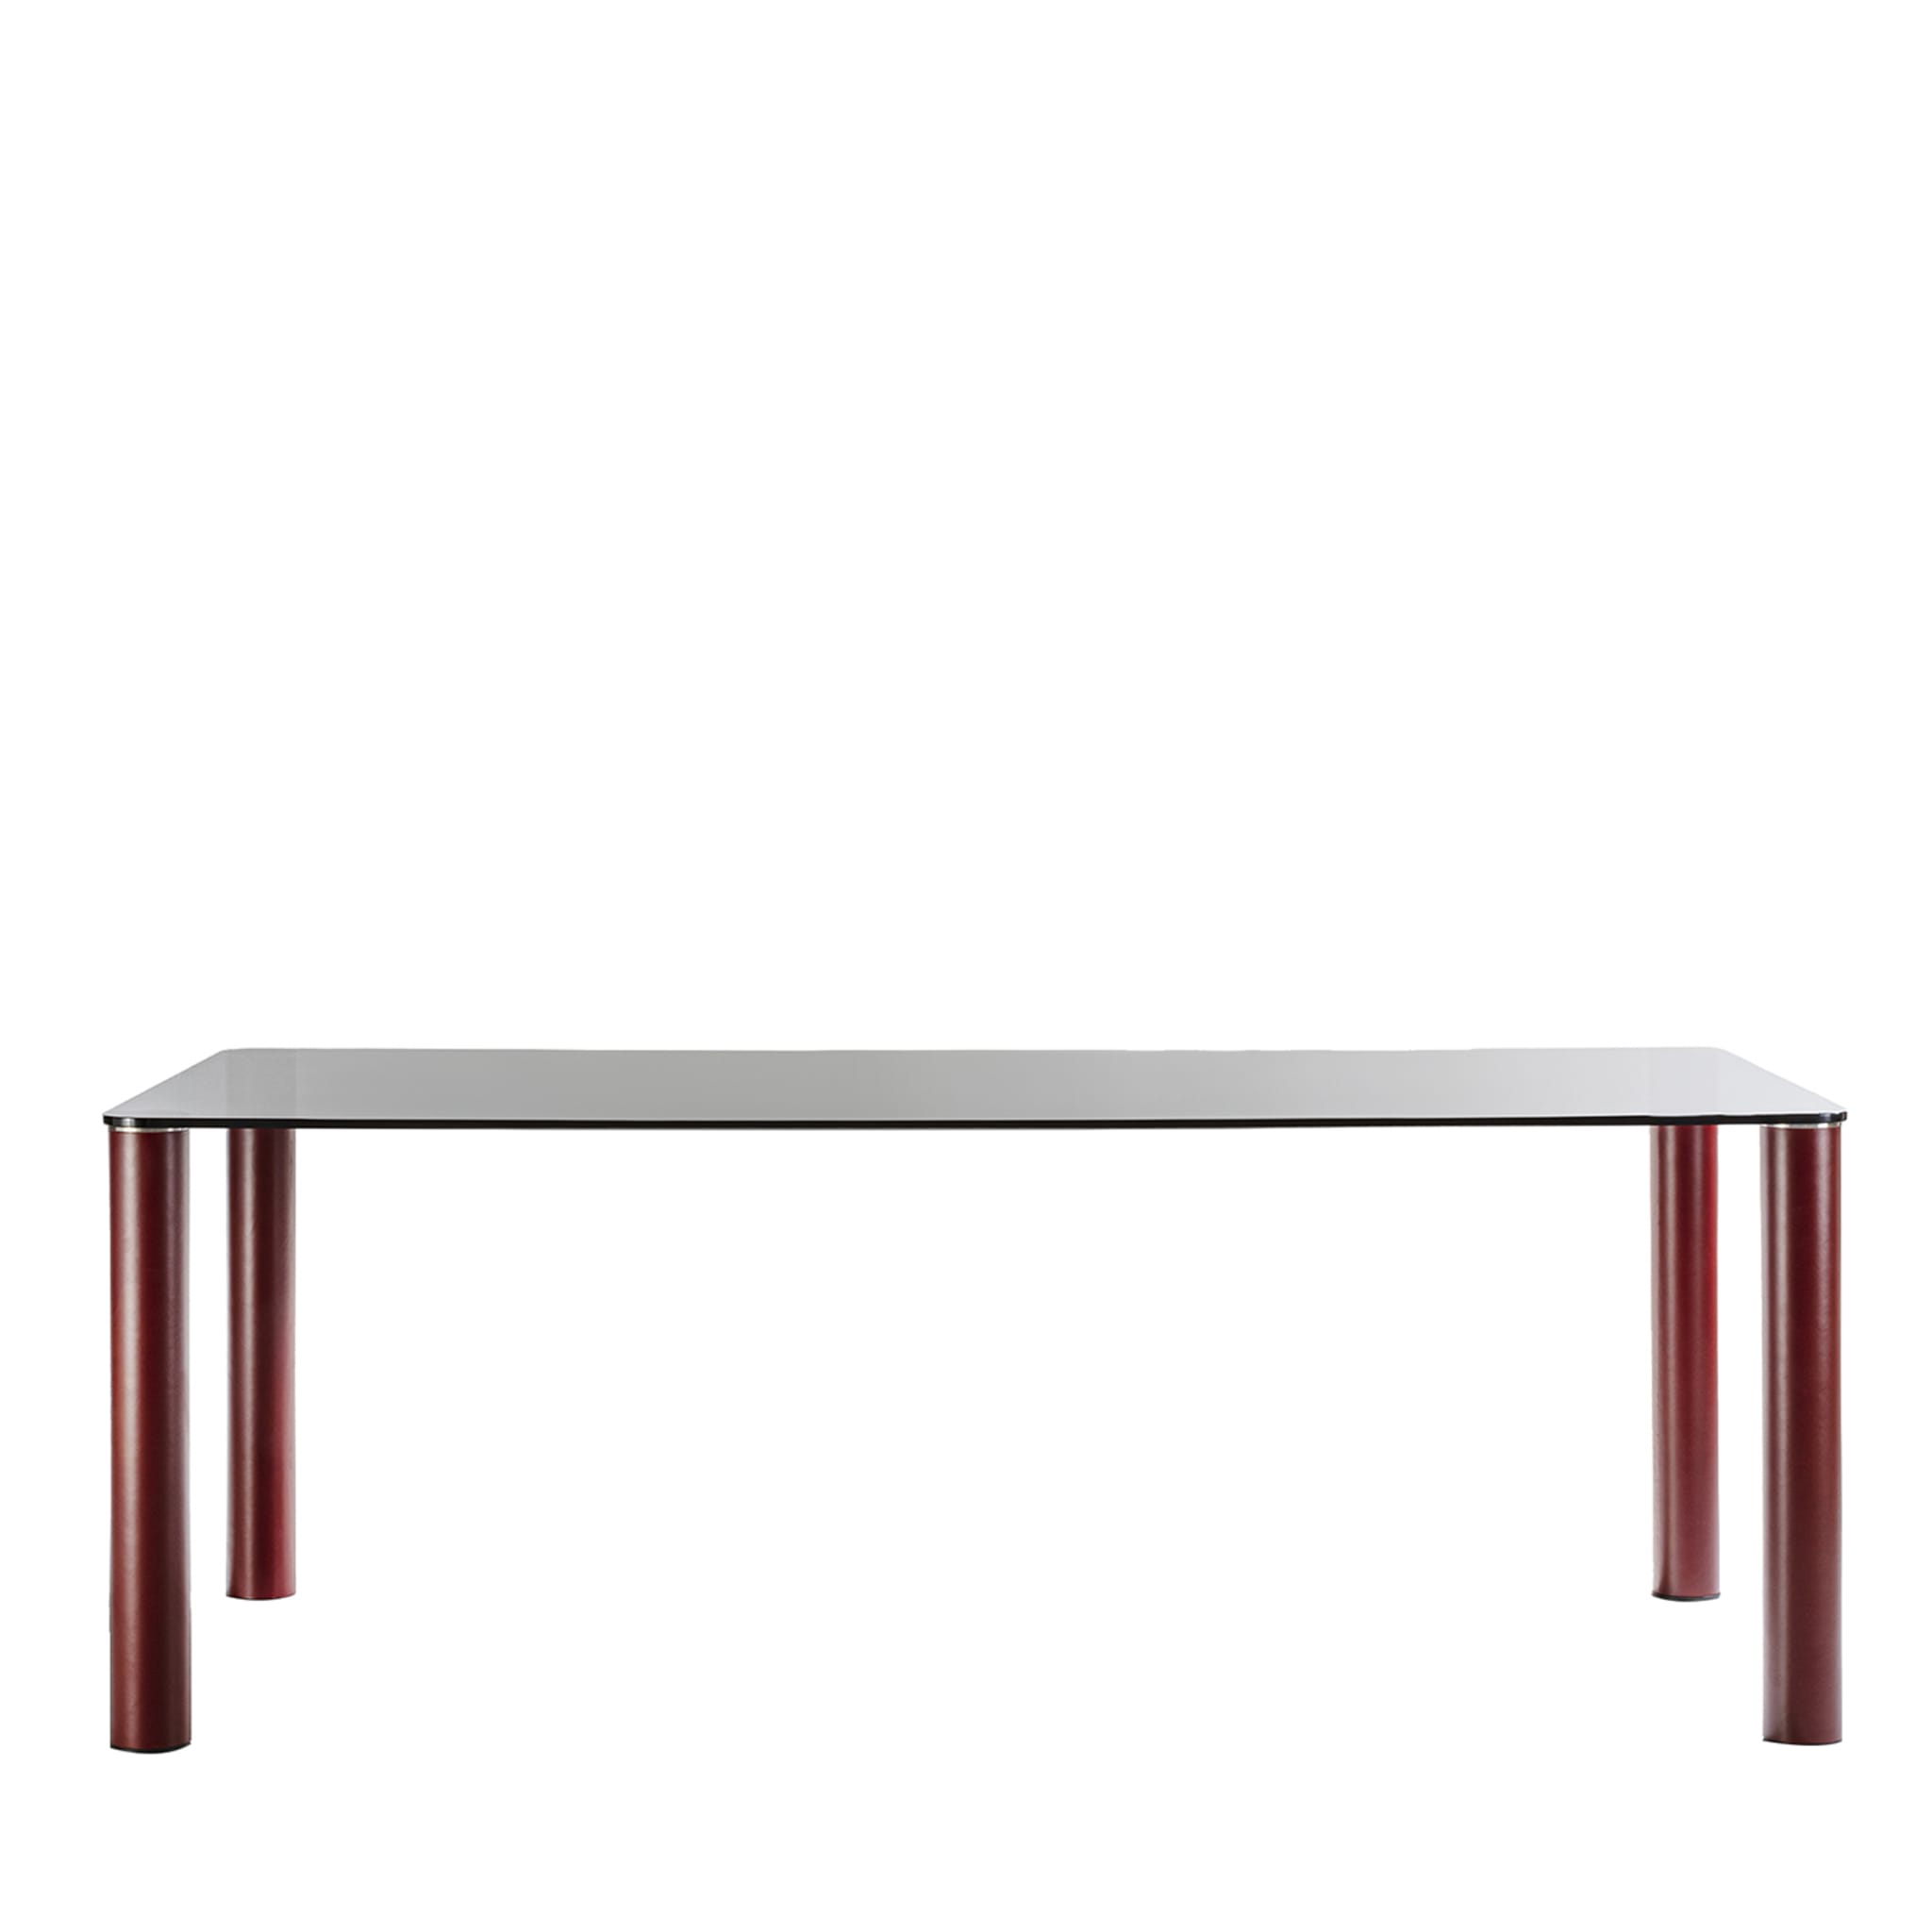 Fagus Smoked Burgundy Dining Table - Main view